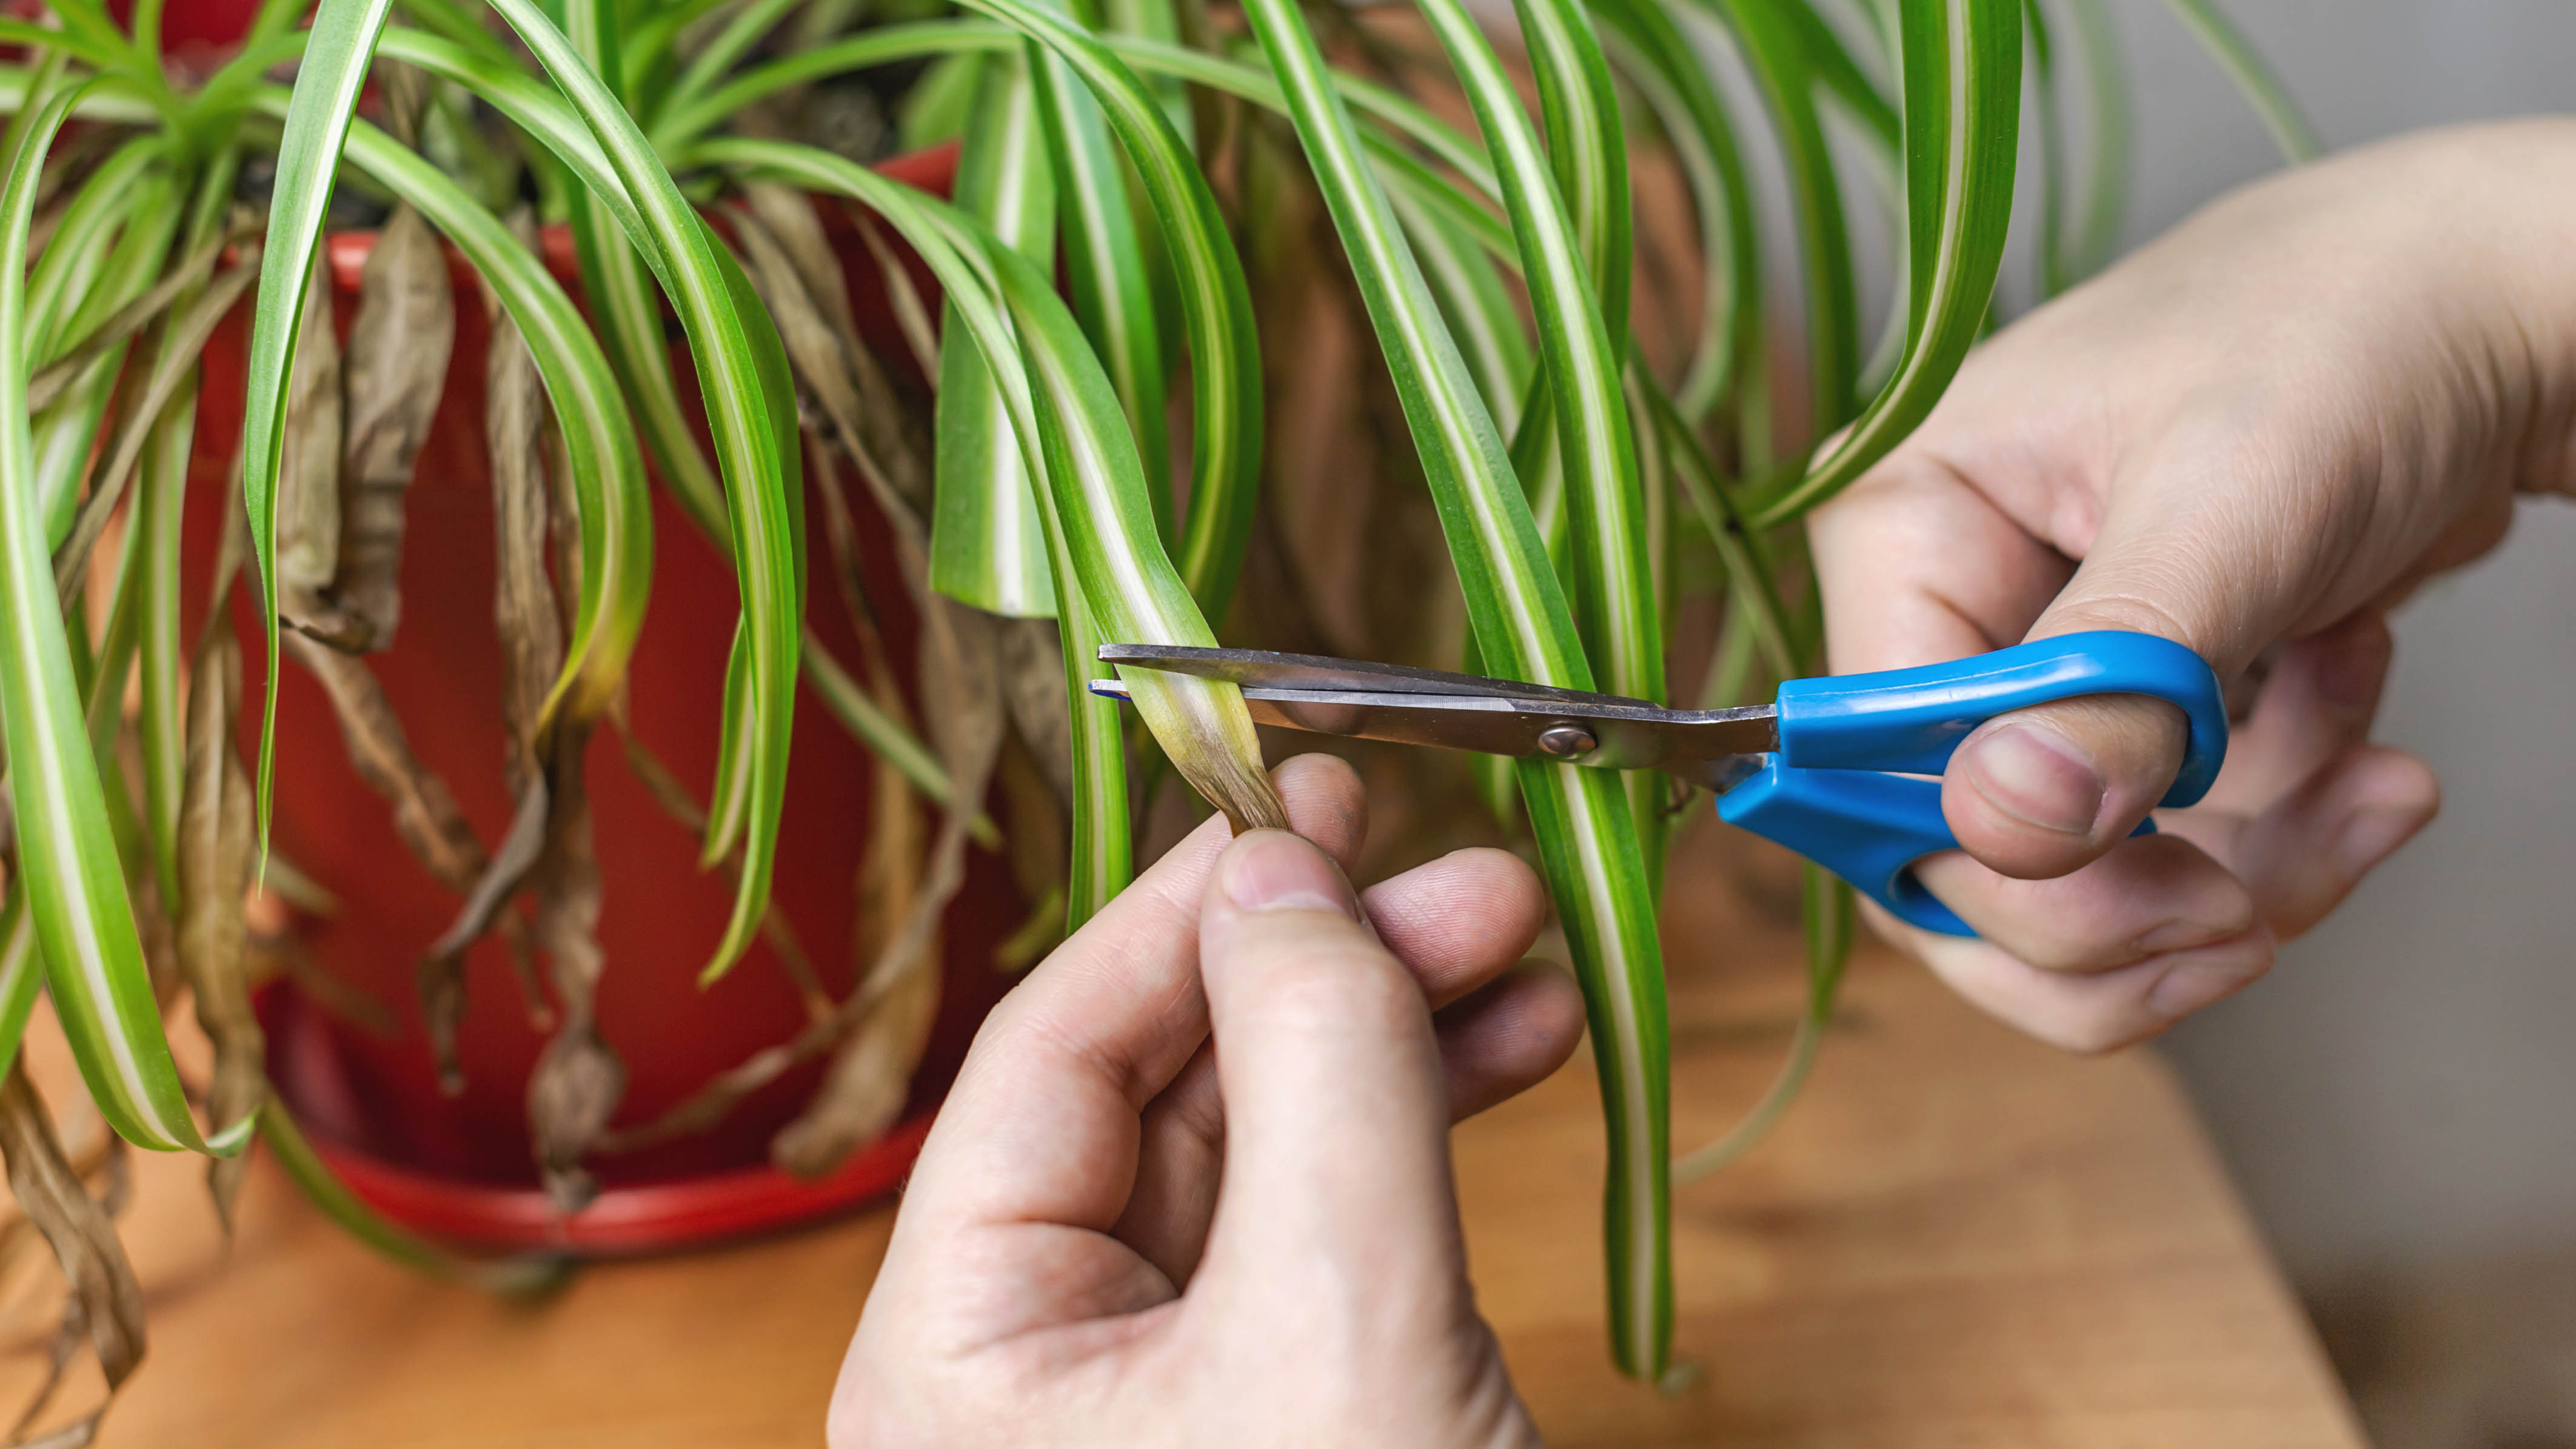 Brown leaves are cut from spider plants.